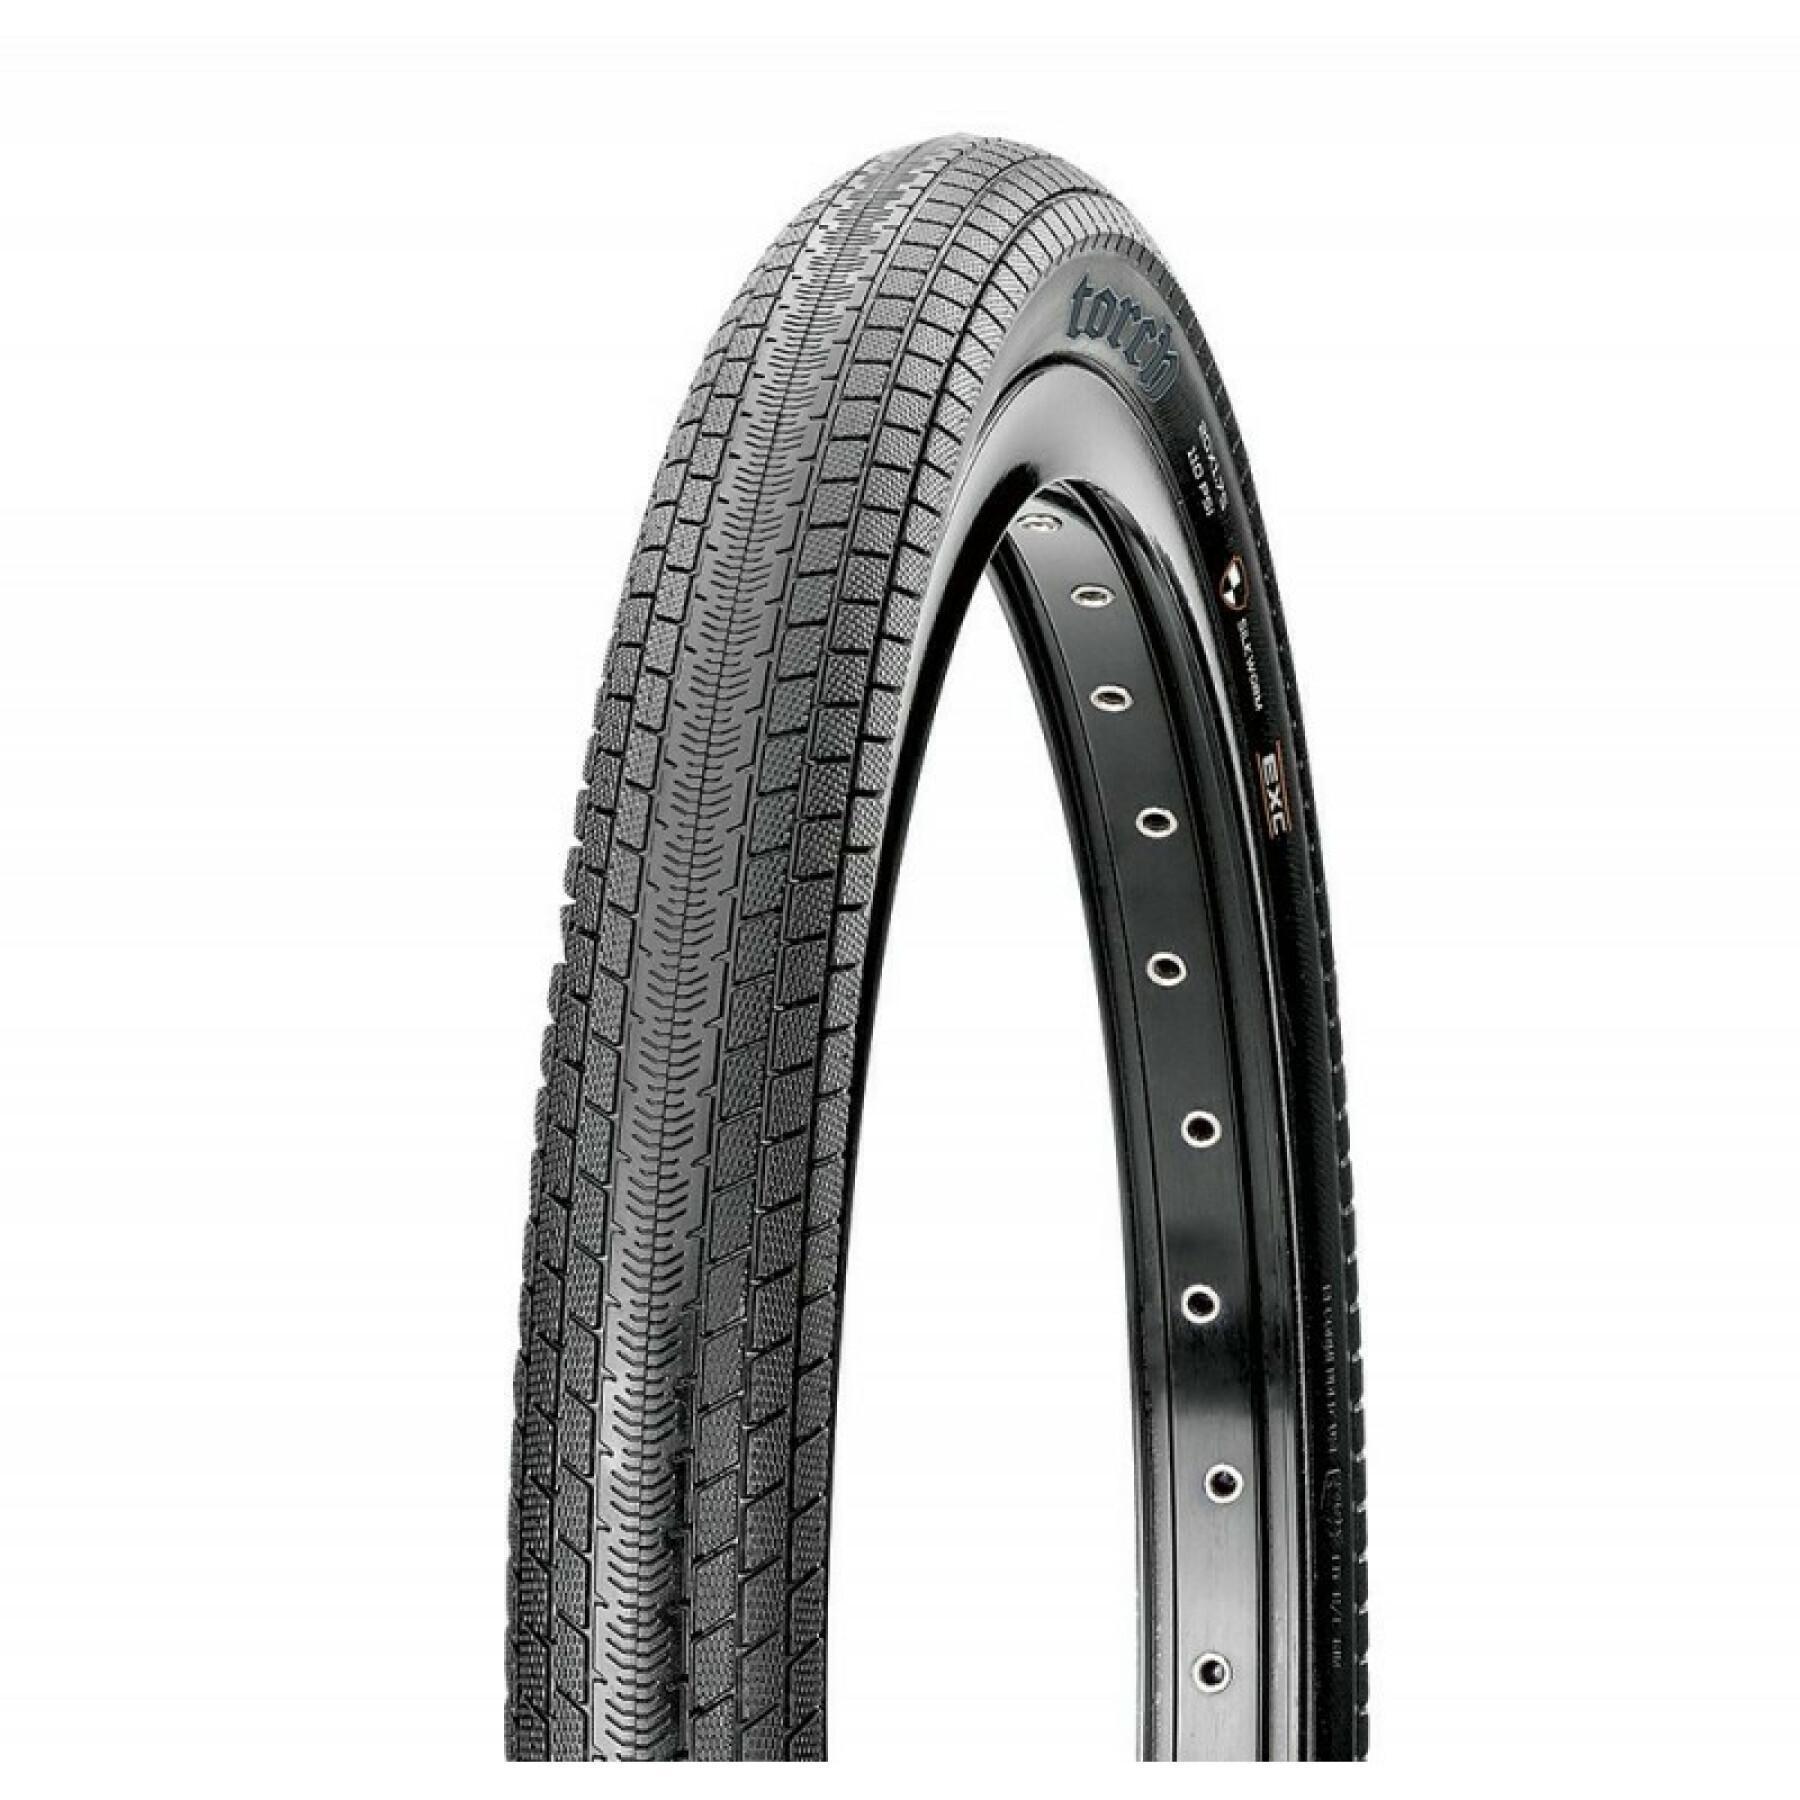 Soft tire Maxxis Torch 20x1.75 Exo / Tubeless Ready